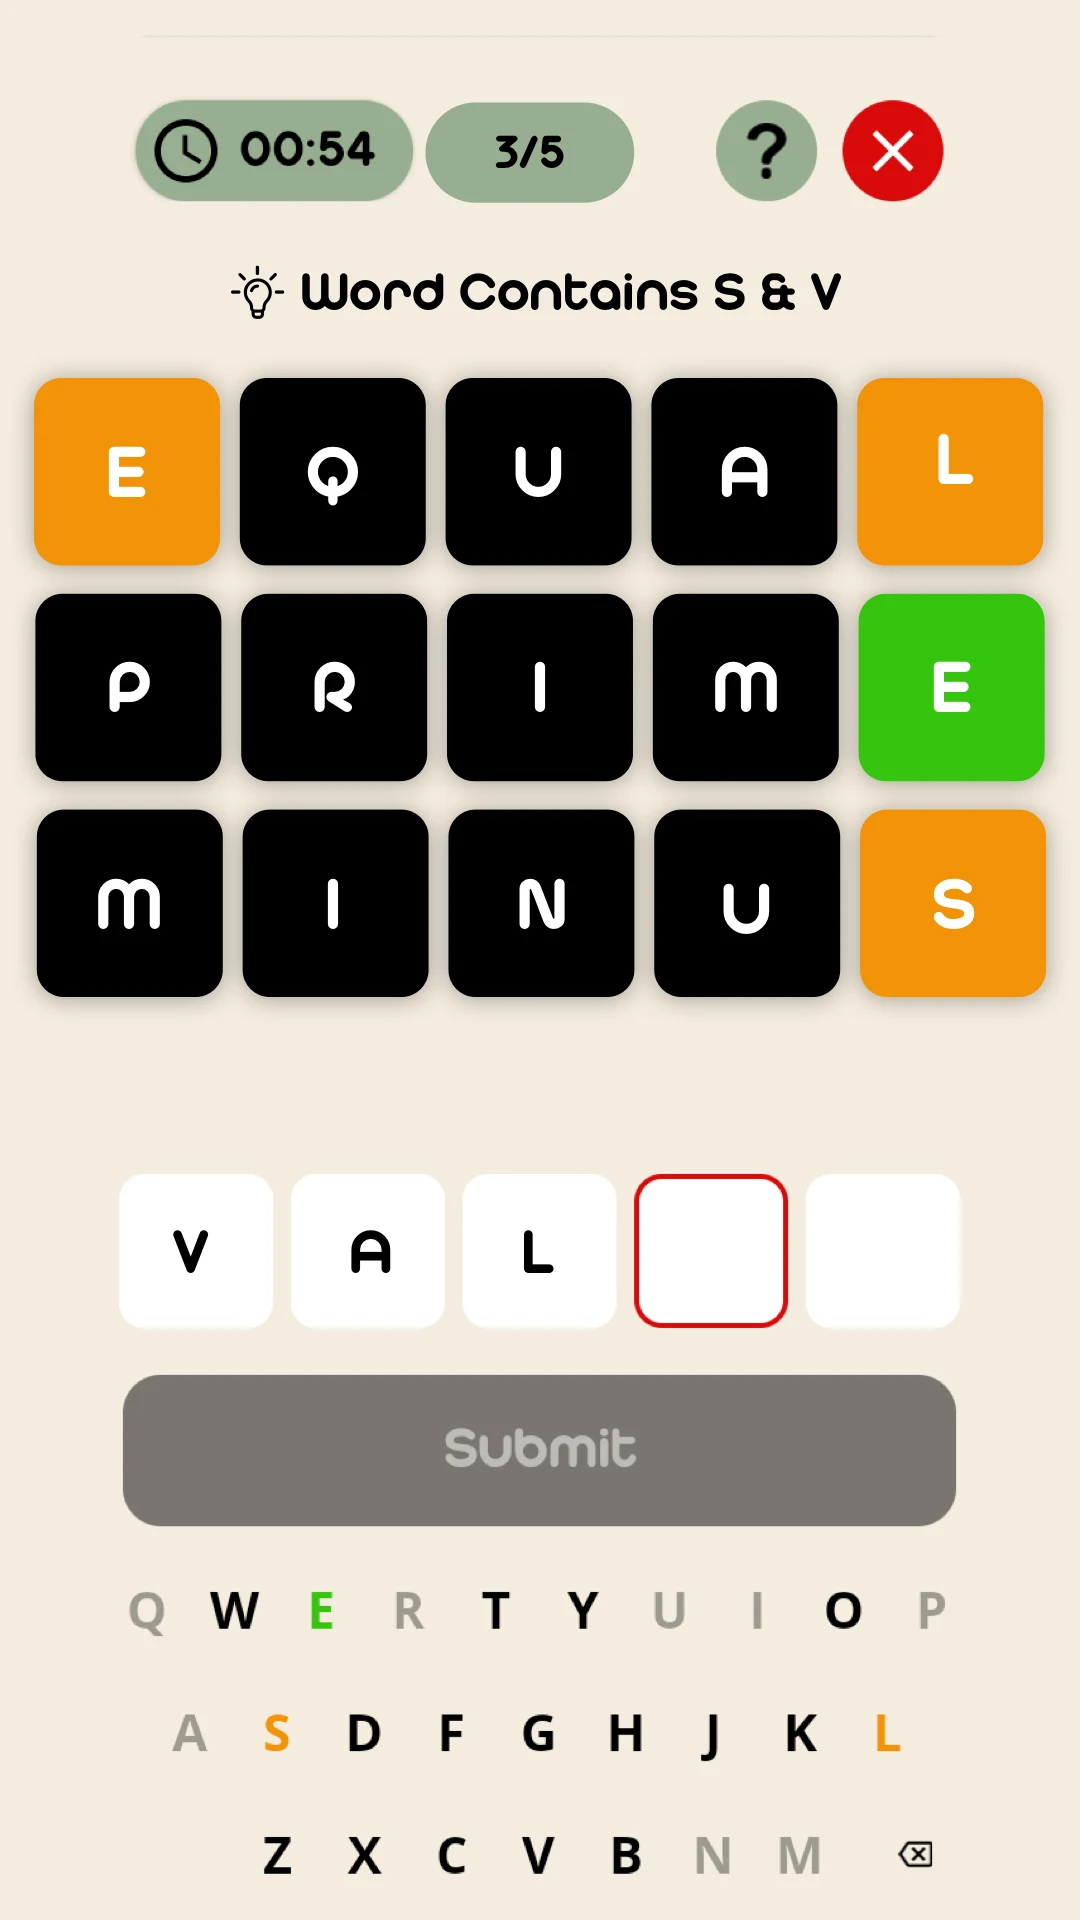 WordGuess - Daily Wordly Game!